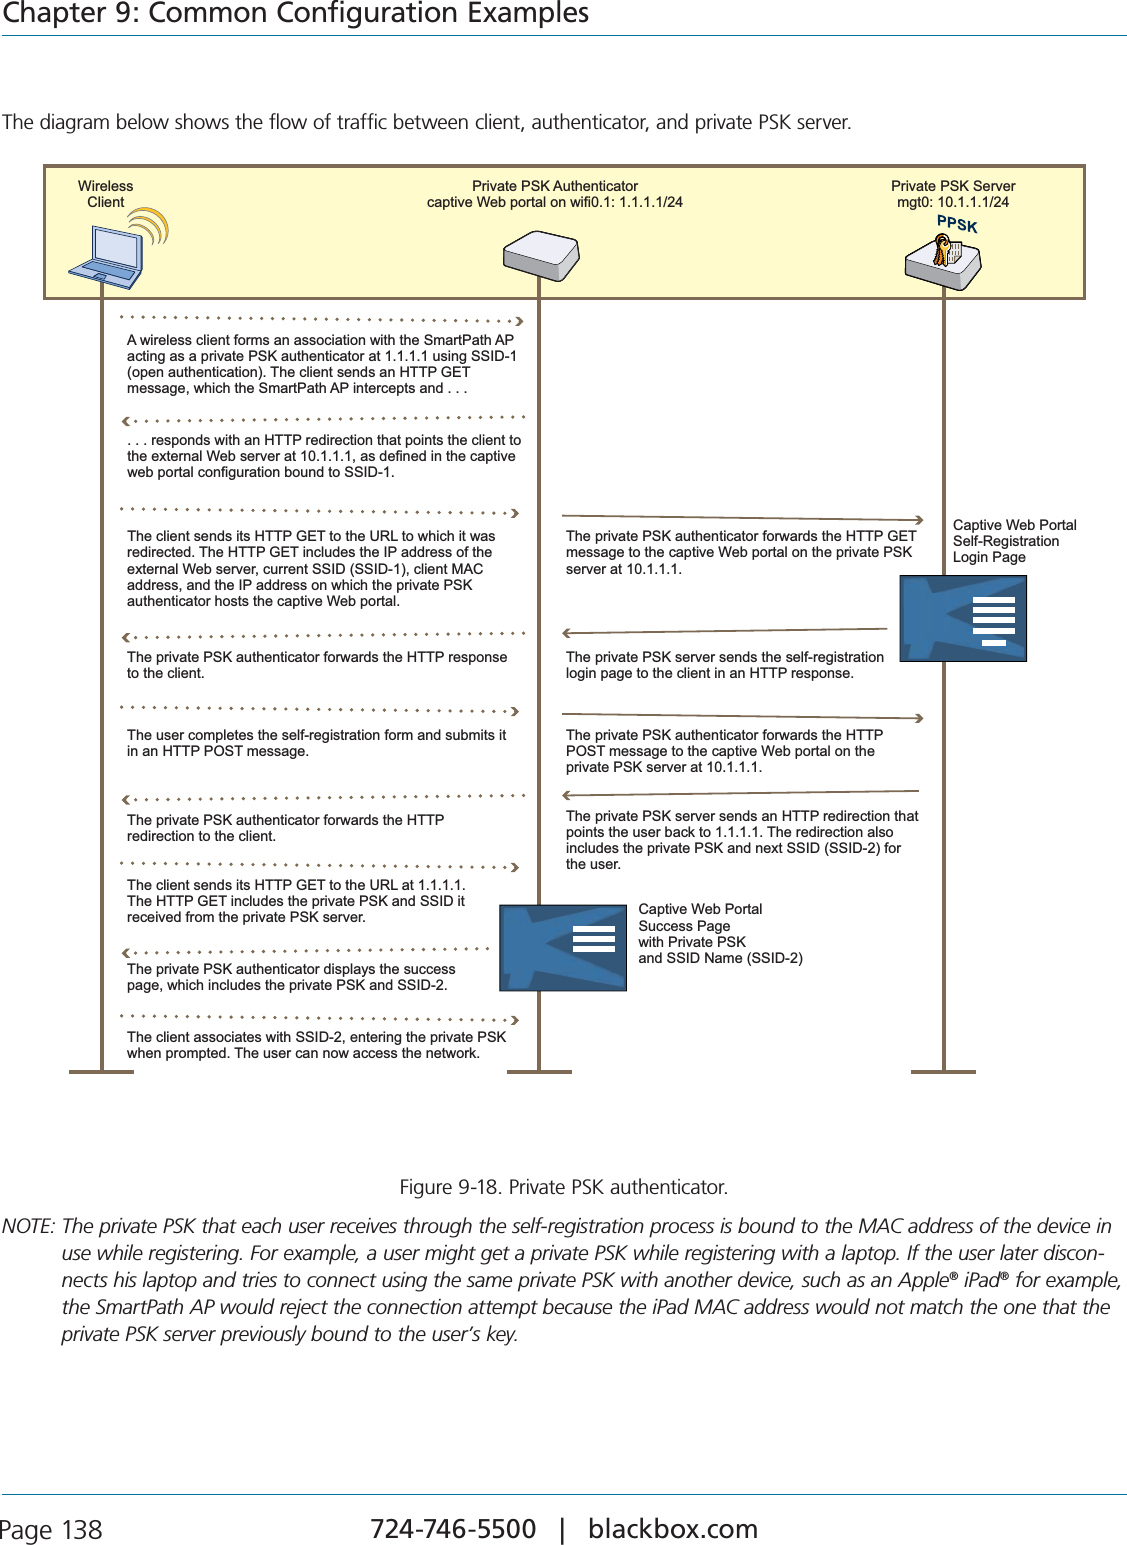 724-746-5500   |   blackbox.com Page 138Chapter 9: Common Configuration ExamplesThe diagram below shows the flow of traffic between client, authenticator, and private PSK server. A wireless client forms an association with the SmartPath AP acting as a private PSK authenticator at 1.1.1.1 using SSID-1 (open authentication). The client sends an HTTP GET message, which the SmartPath AP intercepts and . . .. . . responds with an HTTP redirection that points the client to the external Web server at 10.1.1.1, as defined in the captive web portal configuration bound to SSID-1.The client sends its HTTP GET to the URL to which it was redirected. The HTTP GET includes the IP address of the external Web server, current SSID (SSID-1), client MAC address, and the IP address on which the private PSK authenticator hosts the captive Web portal.The private PSK server sends the self-registration login page to the client in an HTTP response.The private PSK authenticator forwards the HTTP response to the client.The private PSK authenticator forwards the HTTP GET message to the captive Web portal on the private PSK server at 10.1.1.1.Wireless ClientPrivate PSK Authenticatorcaptive Web portal on wifi0.1: 1.1.1.1/24Private PSK Servermgt0: 10.1.1.1/24Captive Web PortalSelf-Registration Login PageThe user completes the self-registration form and submits it in an HTTP POST message.The private PSK authenticator forwards the HTTP POST message to the captive Web portal on the private PSK server at 10.1.1.1.The private PSK authenticator forwards the HTTP redirection to the client.The private PSK authenticator displays the success page, which includes the private PSK and SSID-2.The private PSK server sends an HTTP redirection that points the user back to 1.1.1.1. The redirection also includes the private PSK and next SSID (SSID-2) for the user.The client sends its HTTP GET to the URL at 1.1.1.1. The HTTP GET includes the private PSK and SSID it received from the private PSK server. The client associates with SSID-2, entering the private PSK when prompted. The user can now access the network. Captive Web PortalSuccess Pagewith Private PSKand SSID Name (SSID-2)&amp;IGURE0RIVATE03+AUTHENTICATORNOTE:  The private PSK that each user receives through the self-registration process is bound to the MAC address of the device in use while registering. For example, a user might get a private PSK while registering with a laptop. If the user later discon-nects his laptop and tries to connect using the same private PSK with another device, such as an Apple® iPad® for example, the SmartPath AP would reject the connection attempt because the iPad MAC address would not match the one that the private PSK server previously bound to the user’s key. 